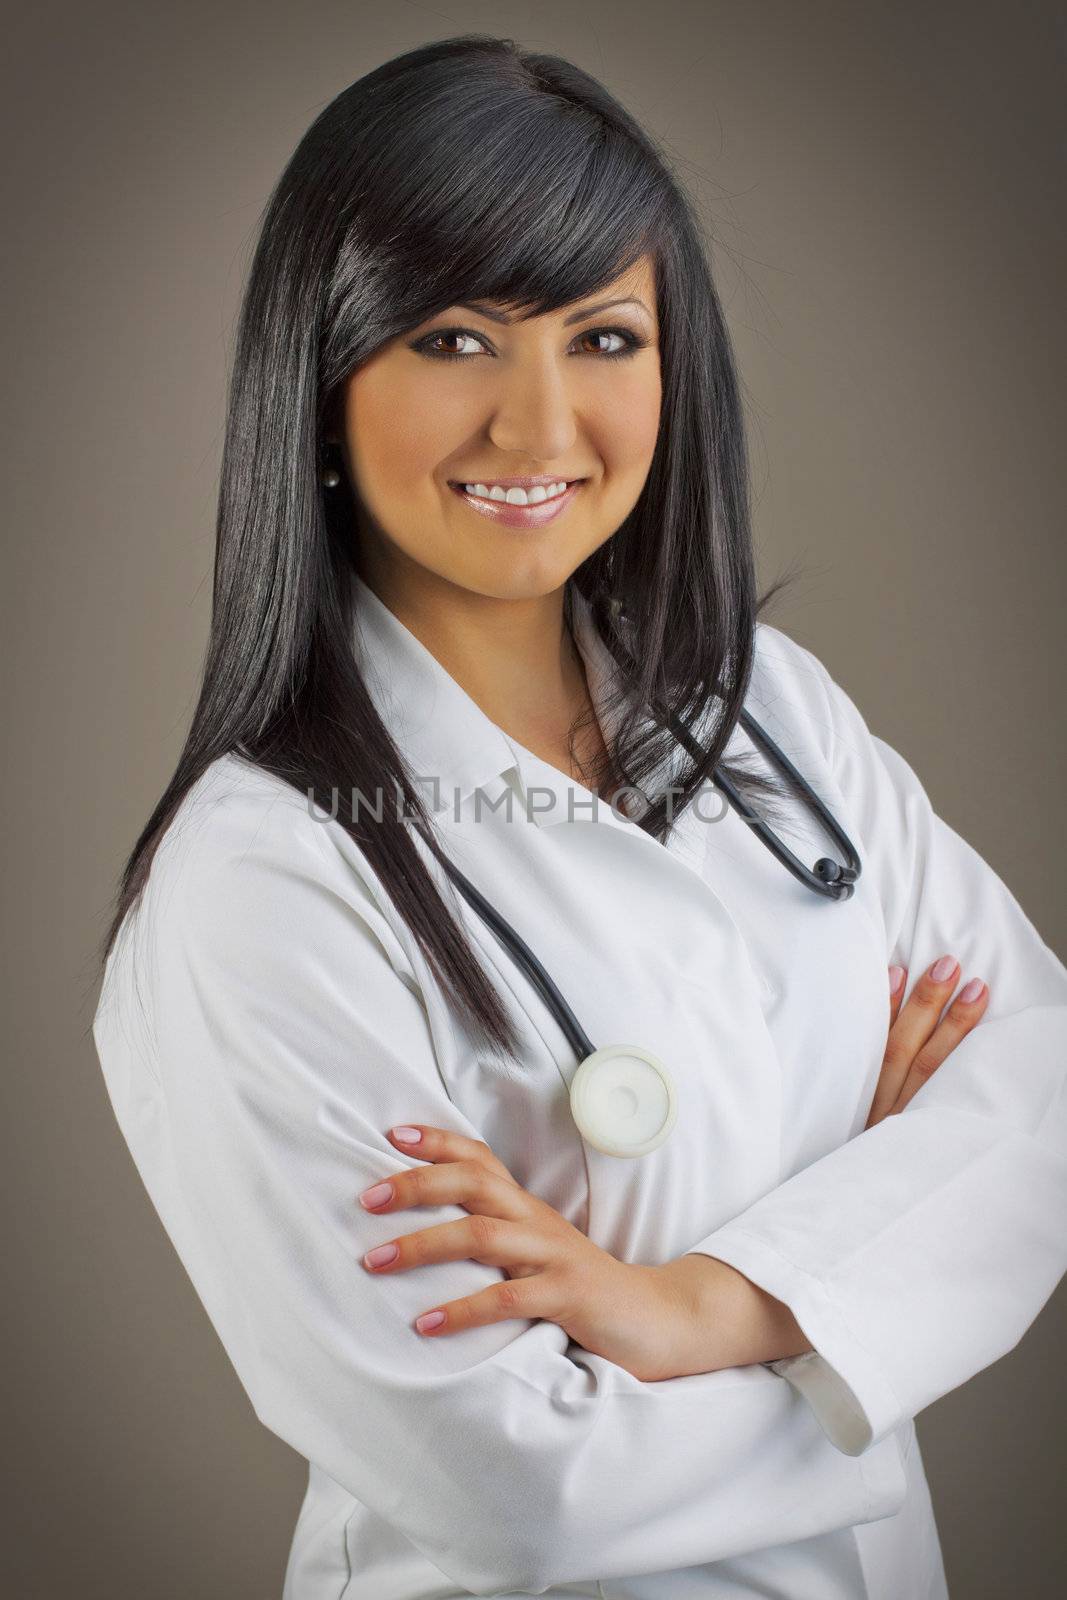 Smiling medical doctor with stethoscope on gray background